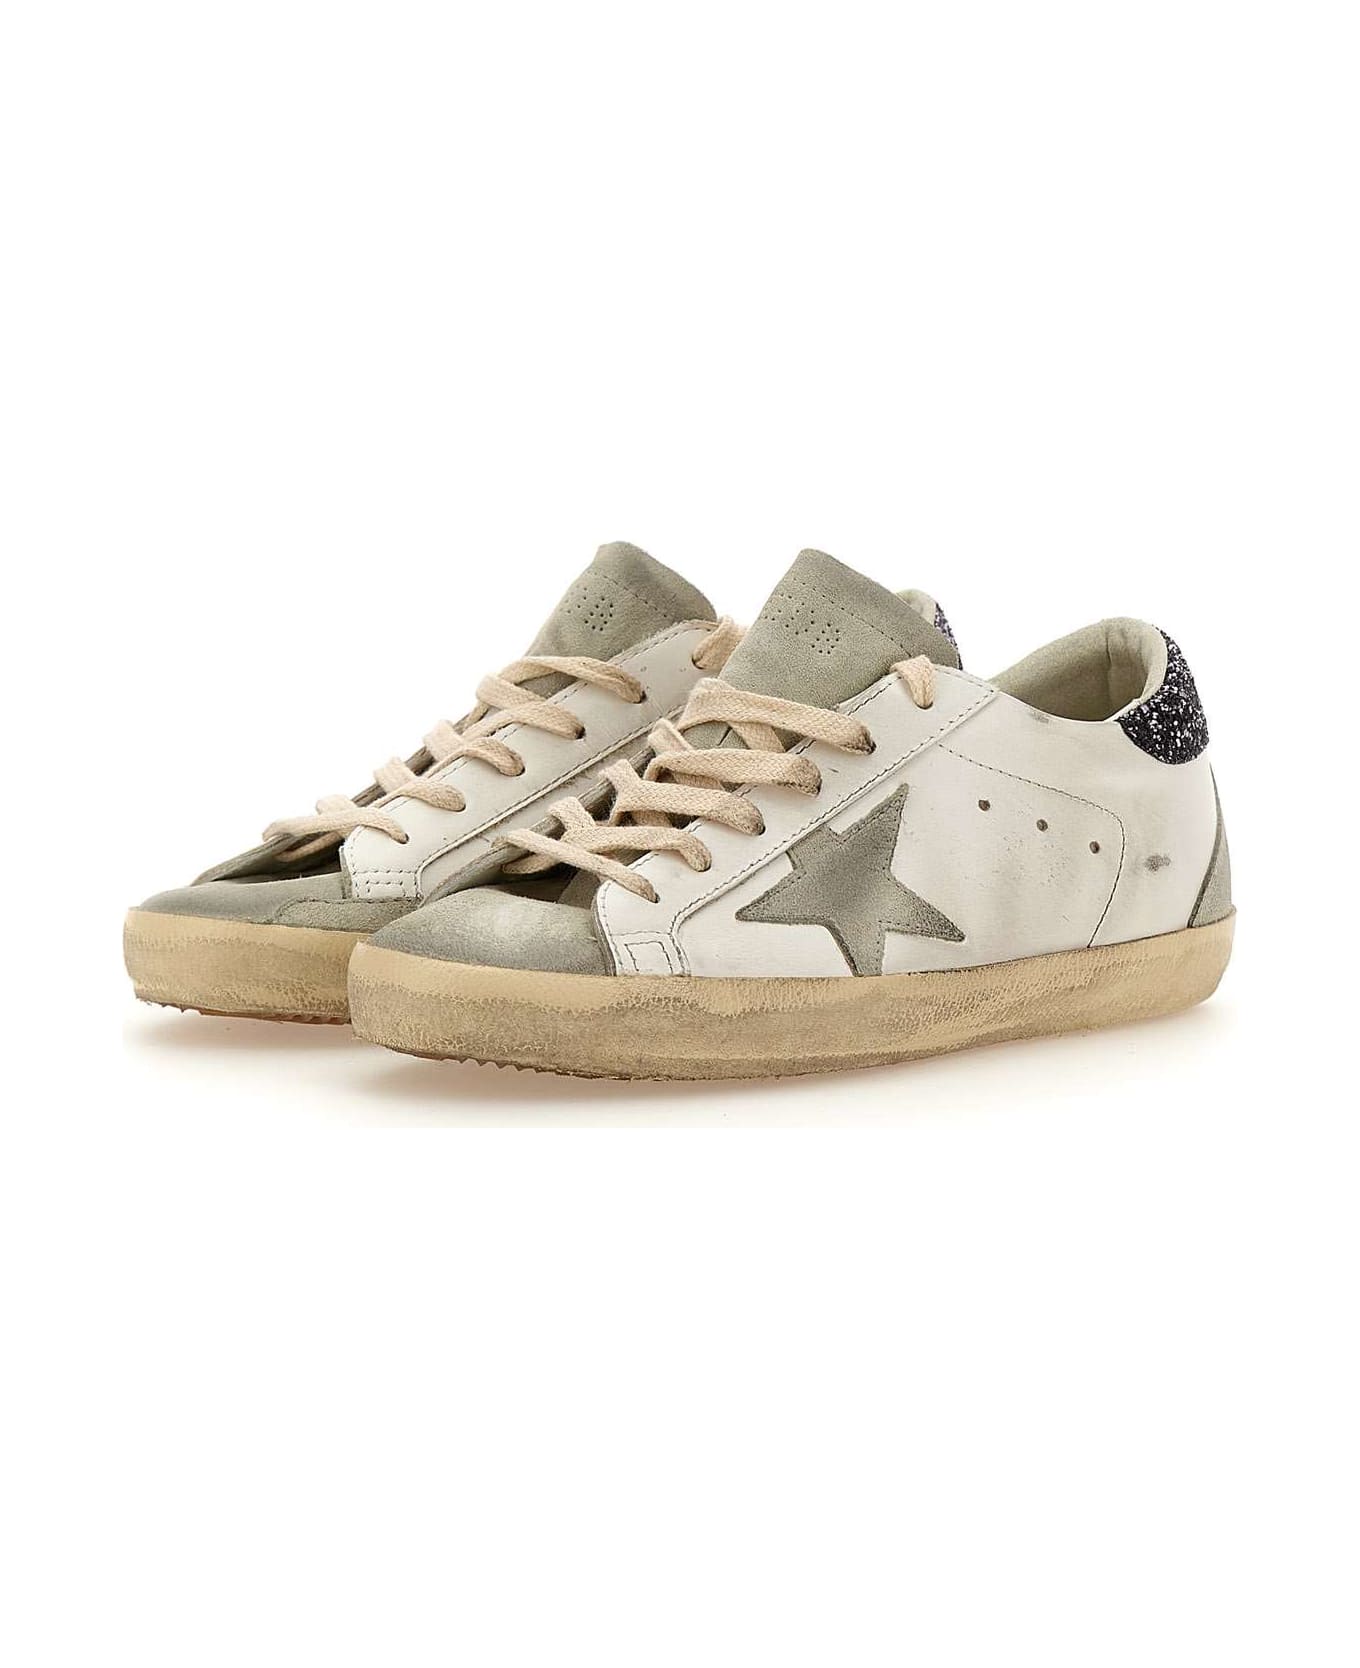 Golden Goose Super Star Classic Leather Sneakers - White/ice/grey